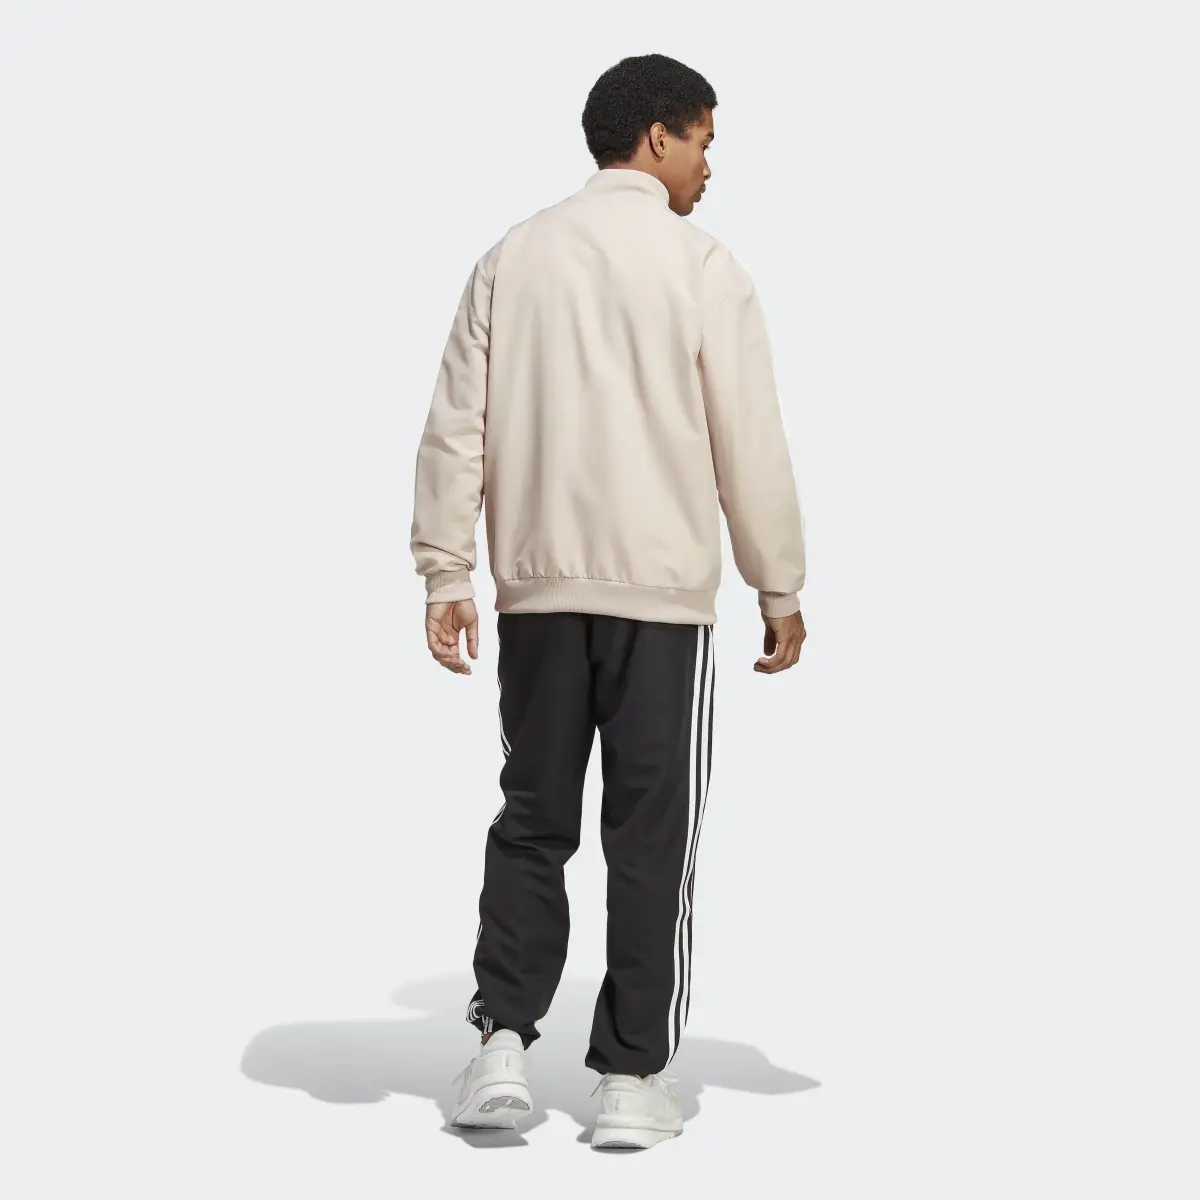 Adidas 3-Stripes Woven Track Suit. 3